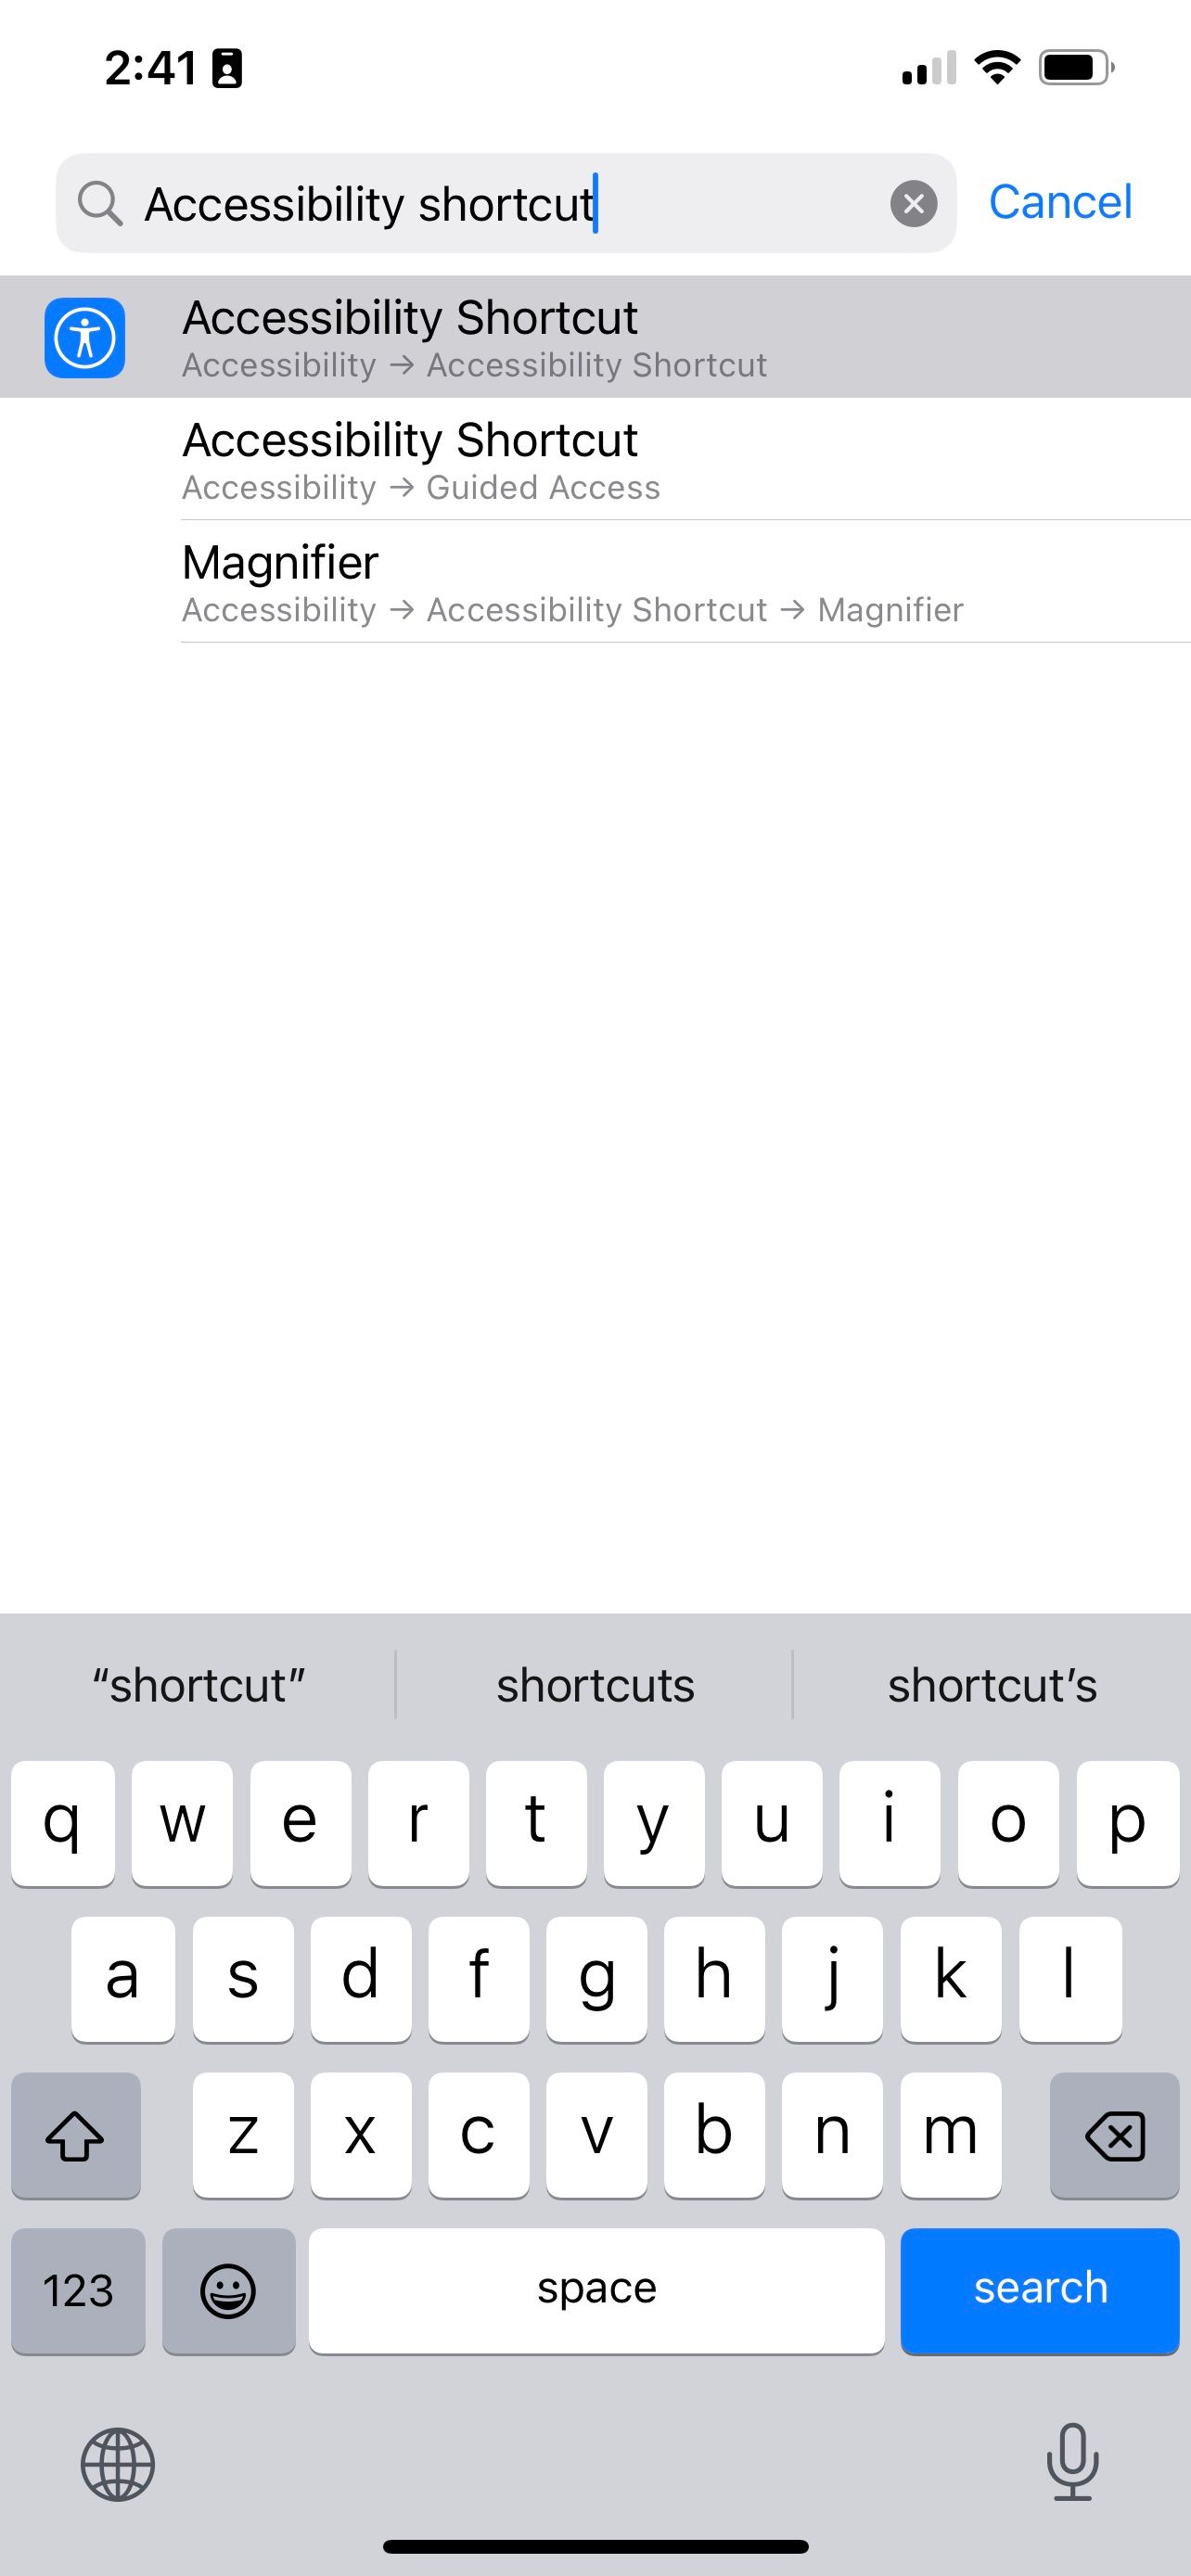 Alternative method to find the accessibility shortcut via search in settings